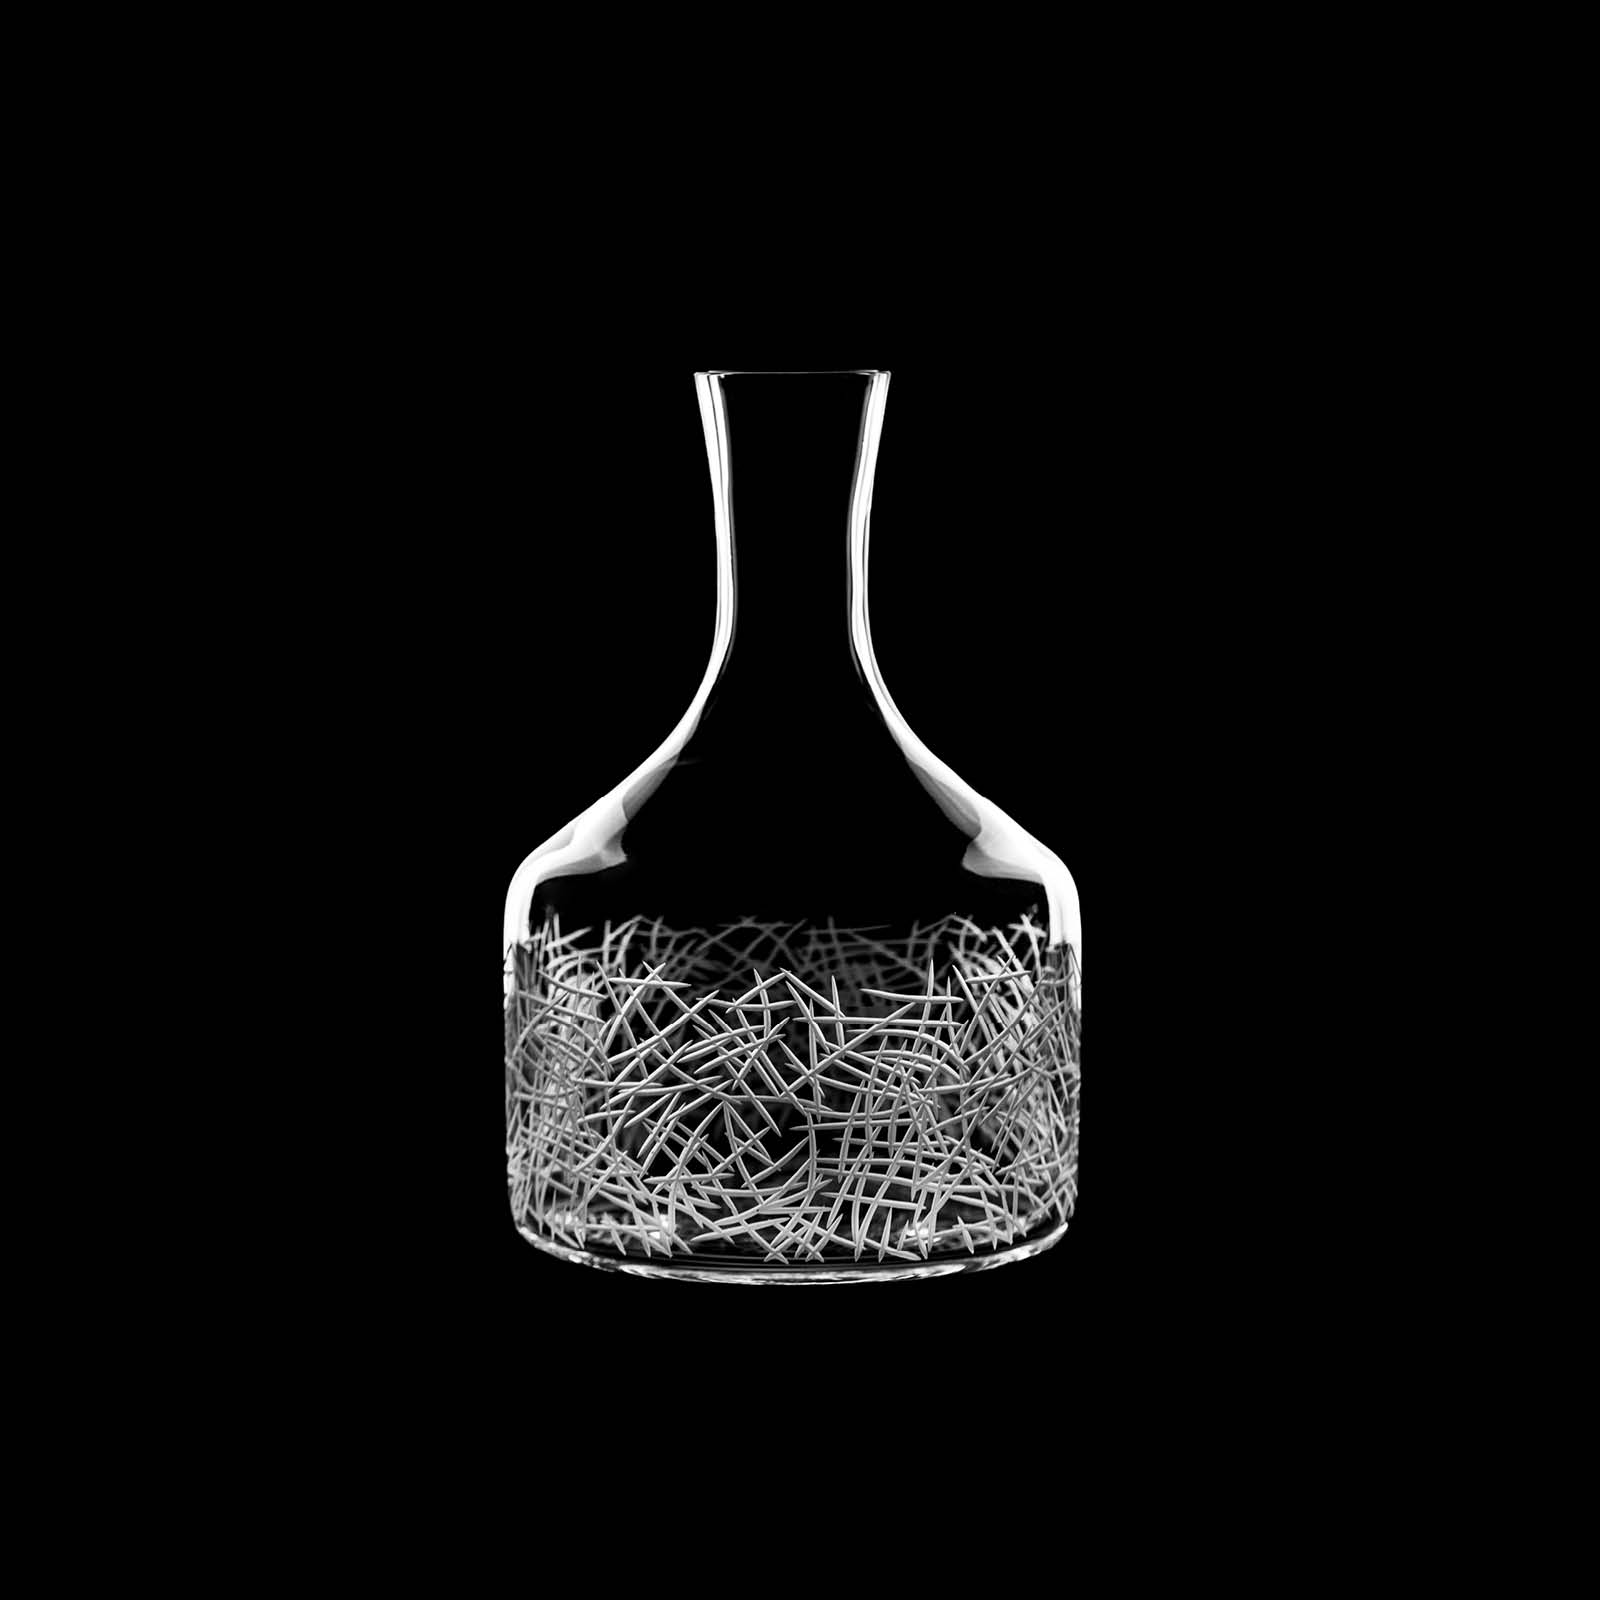 Salviati crystal clear caraffe with "Twigs" cold-worked engravigns